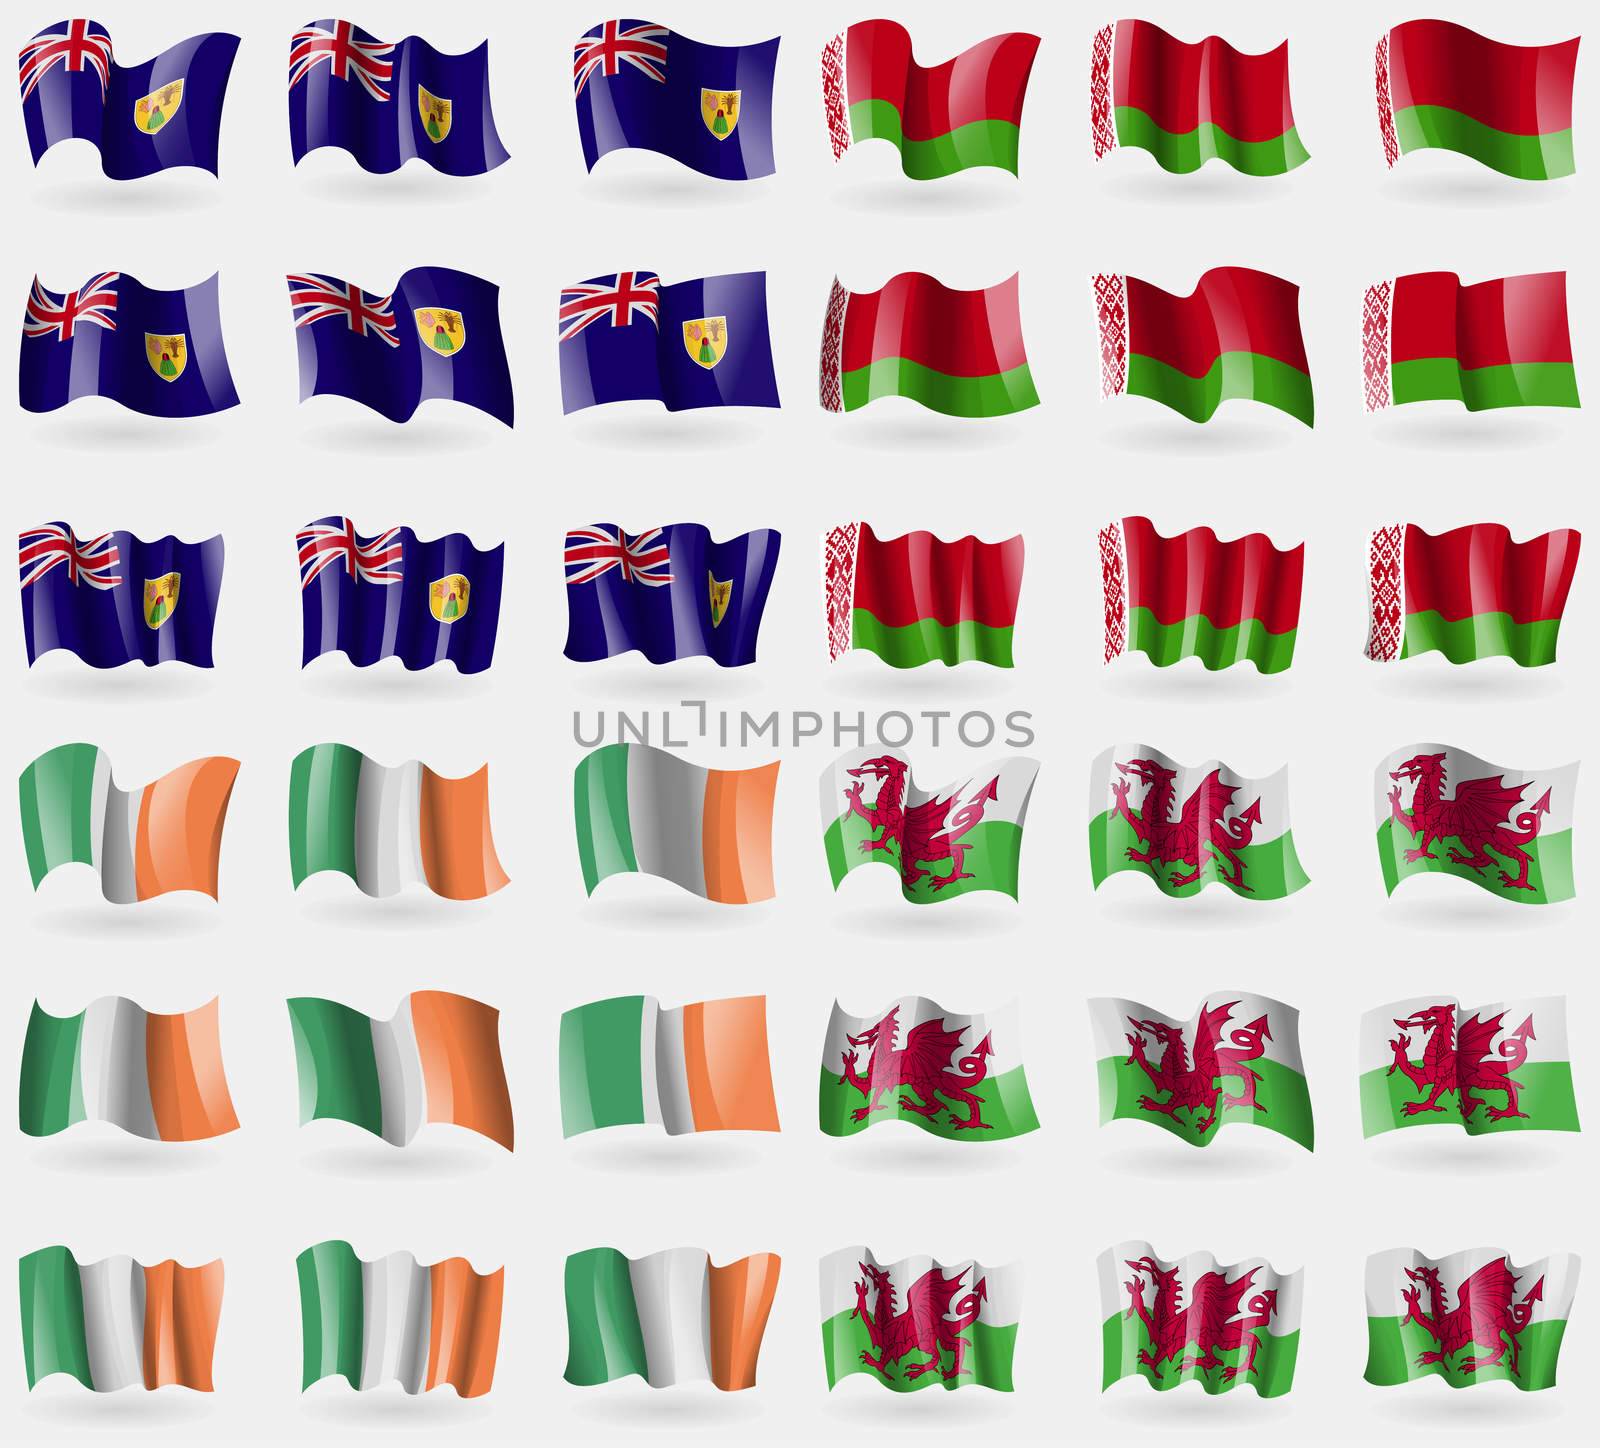 Turks and Caicos, Belarus, Ireland, Wales. Set of 36 flags of the countries of the world. illustration